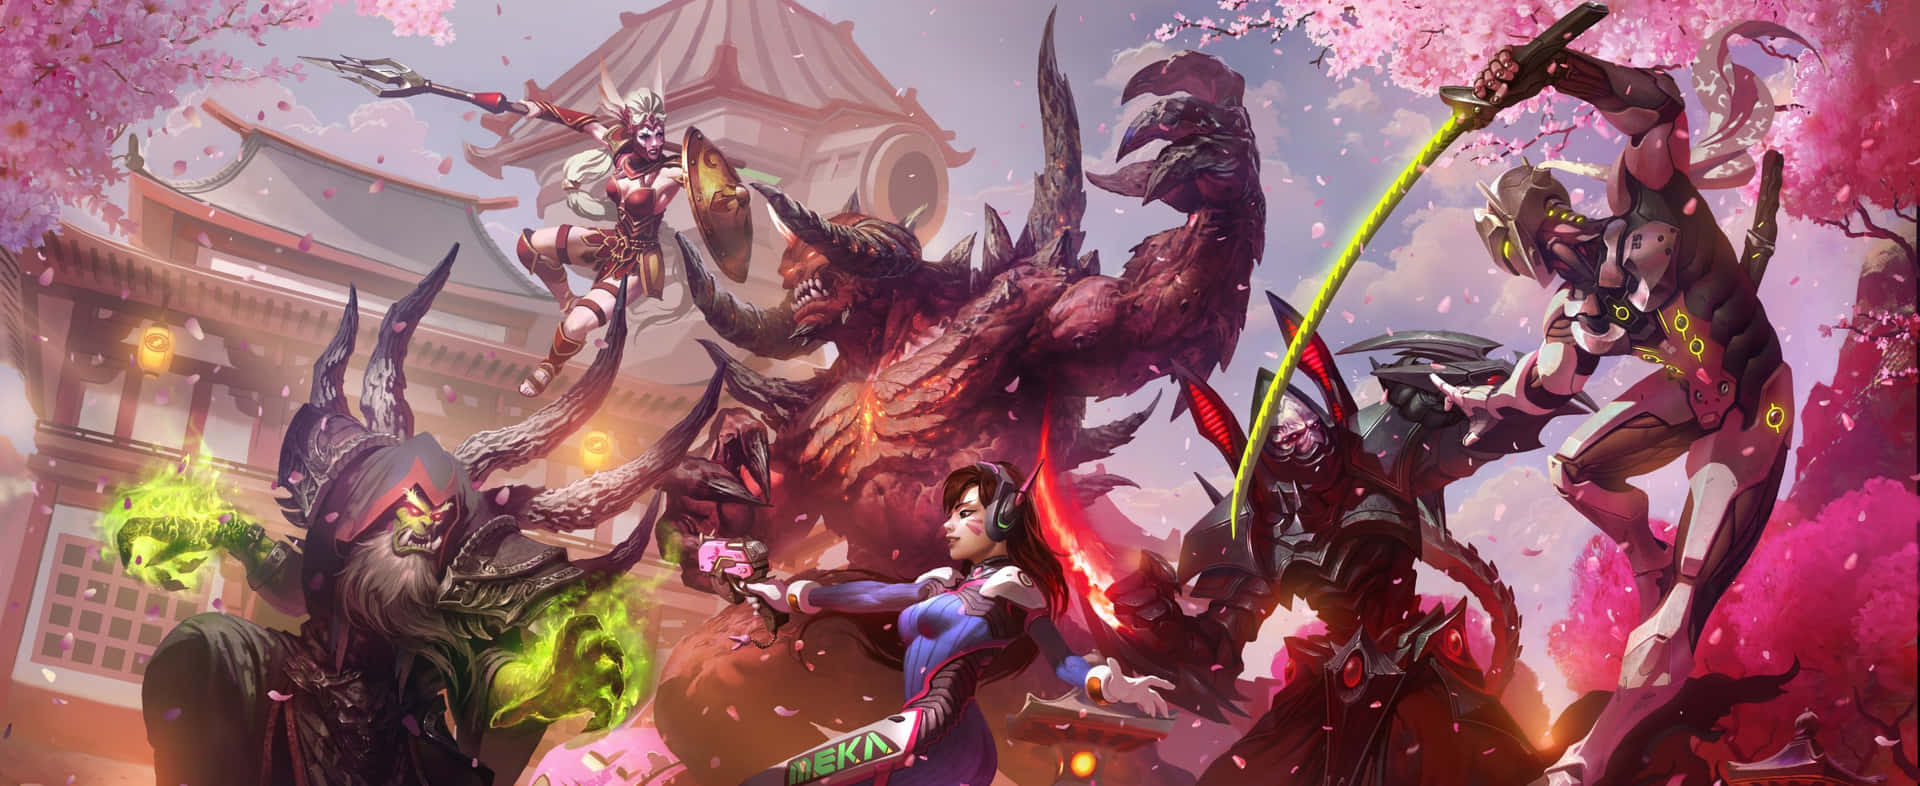 3440x1440 Game Heroes Of The Storm